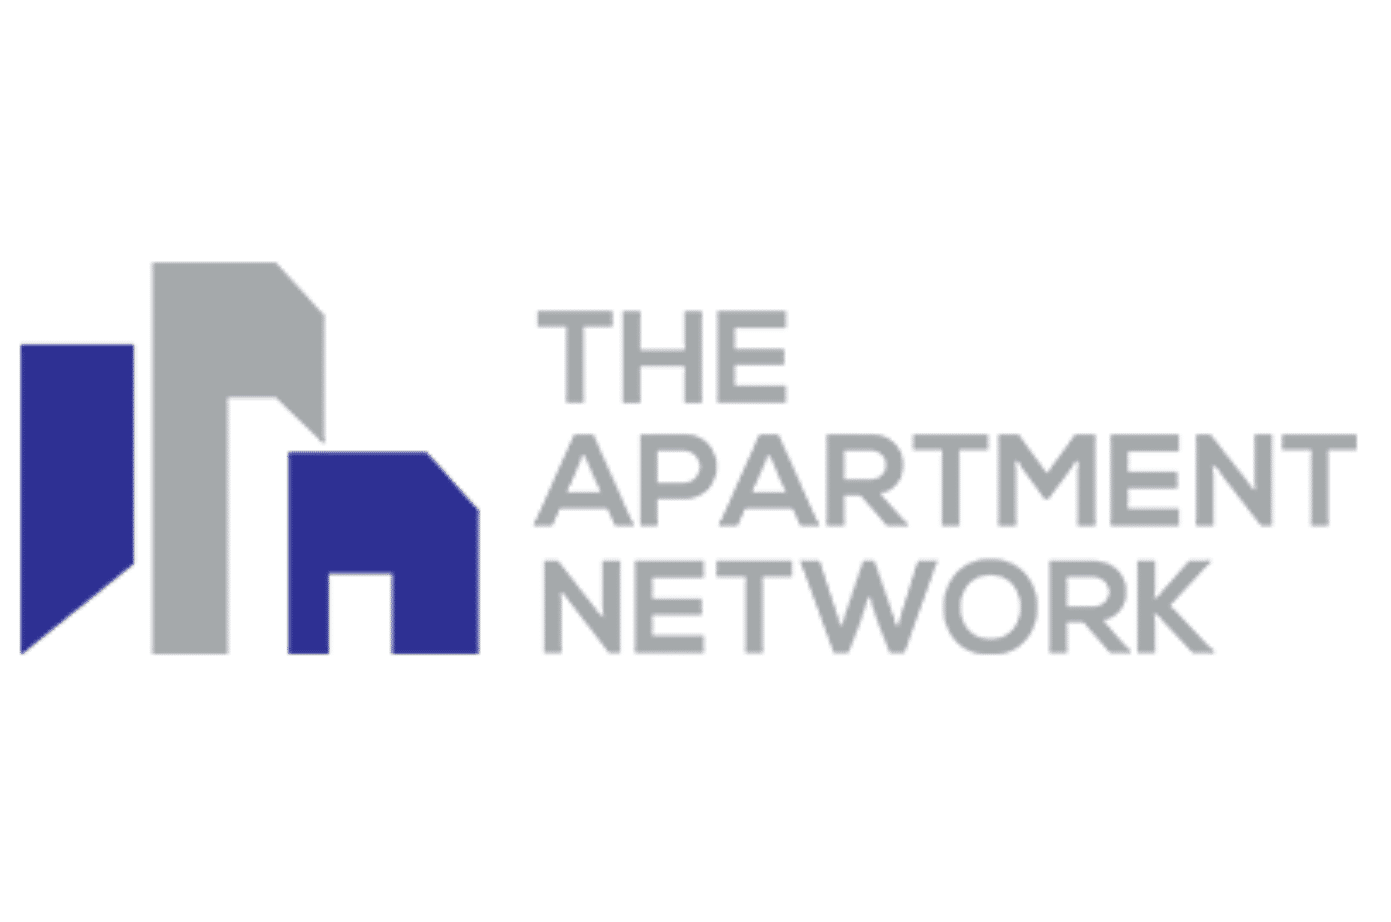 The Apartment Network Adds Carbon Offsetting